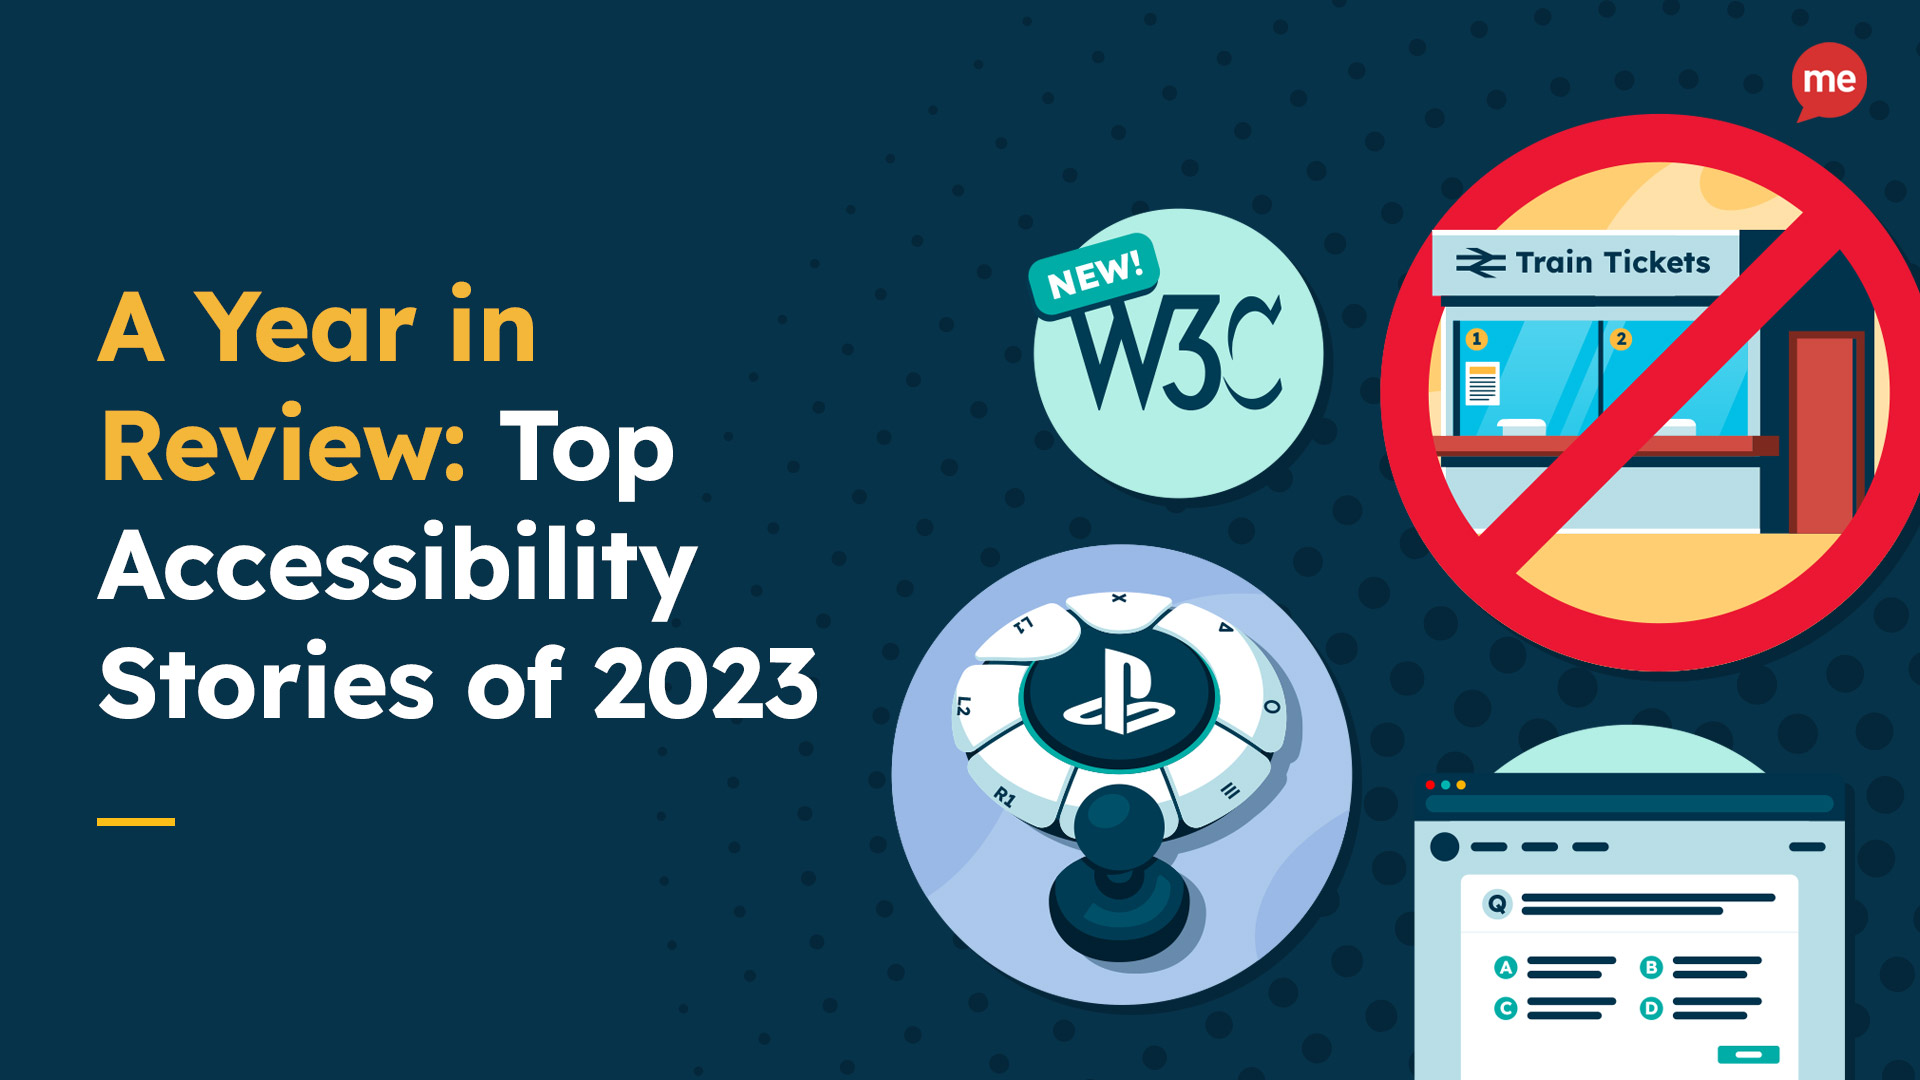 A Year in Review: Top Accessibility Stories of 2023